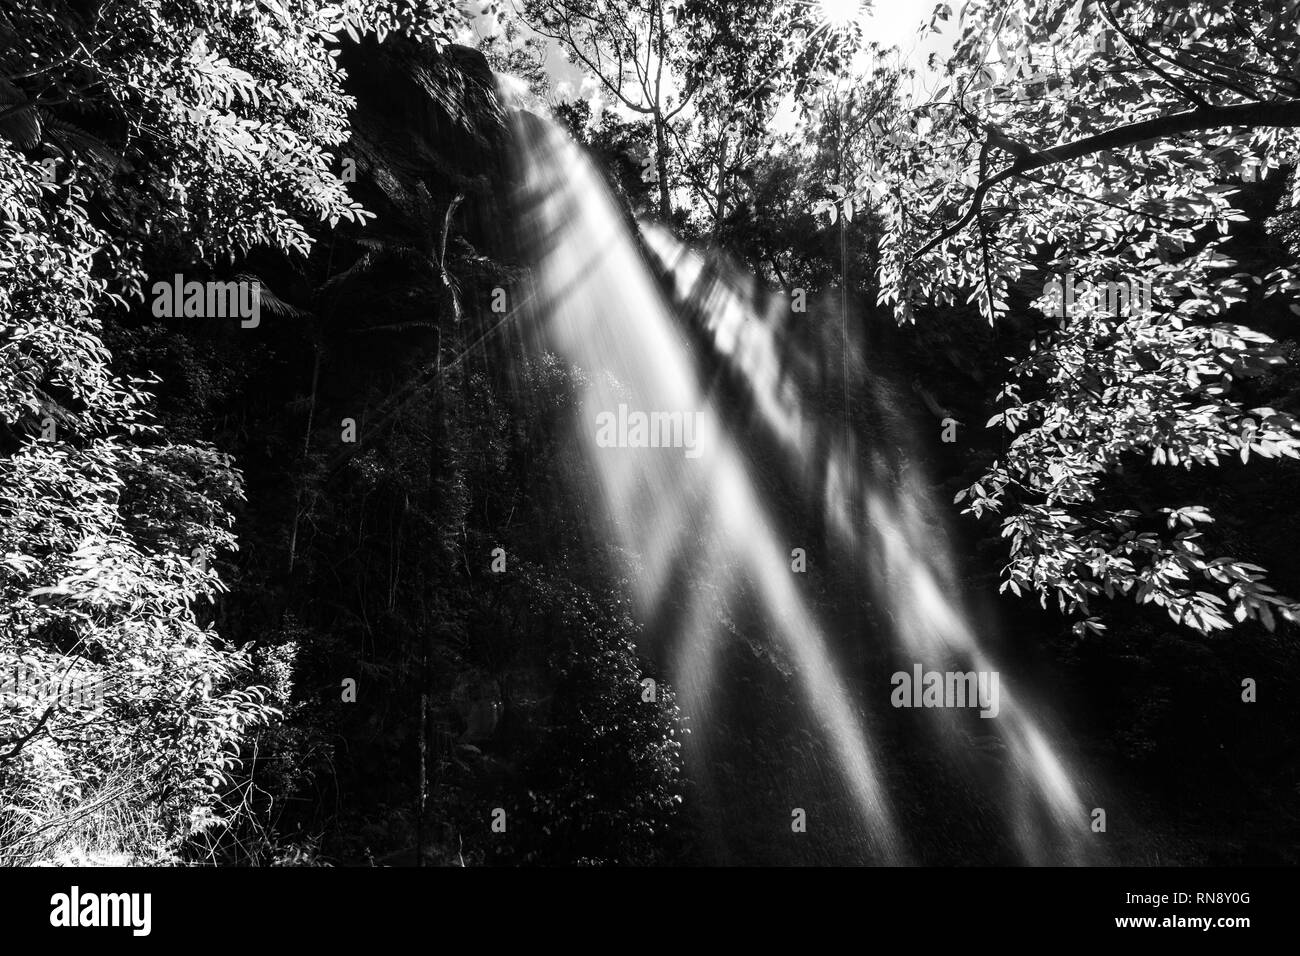 Amazing forest waterfall bathing in sunlight - black and white image Stock Photo